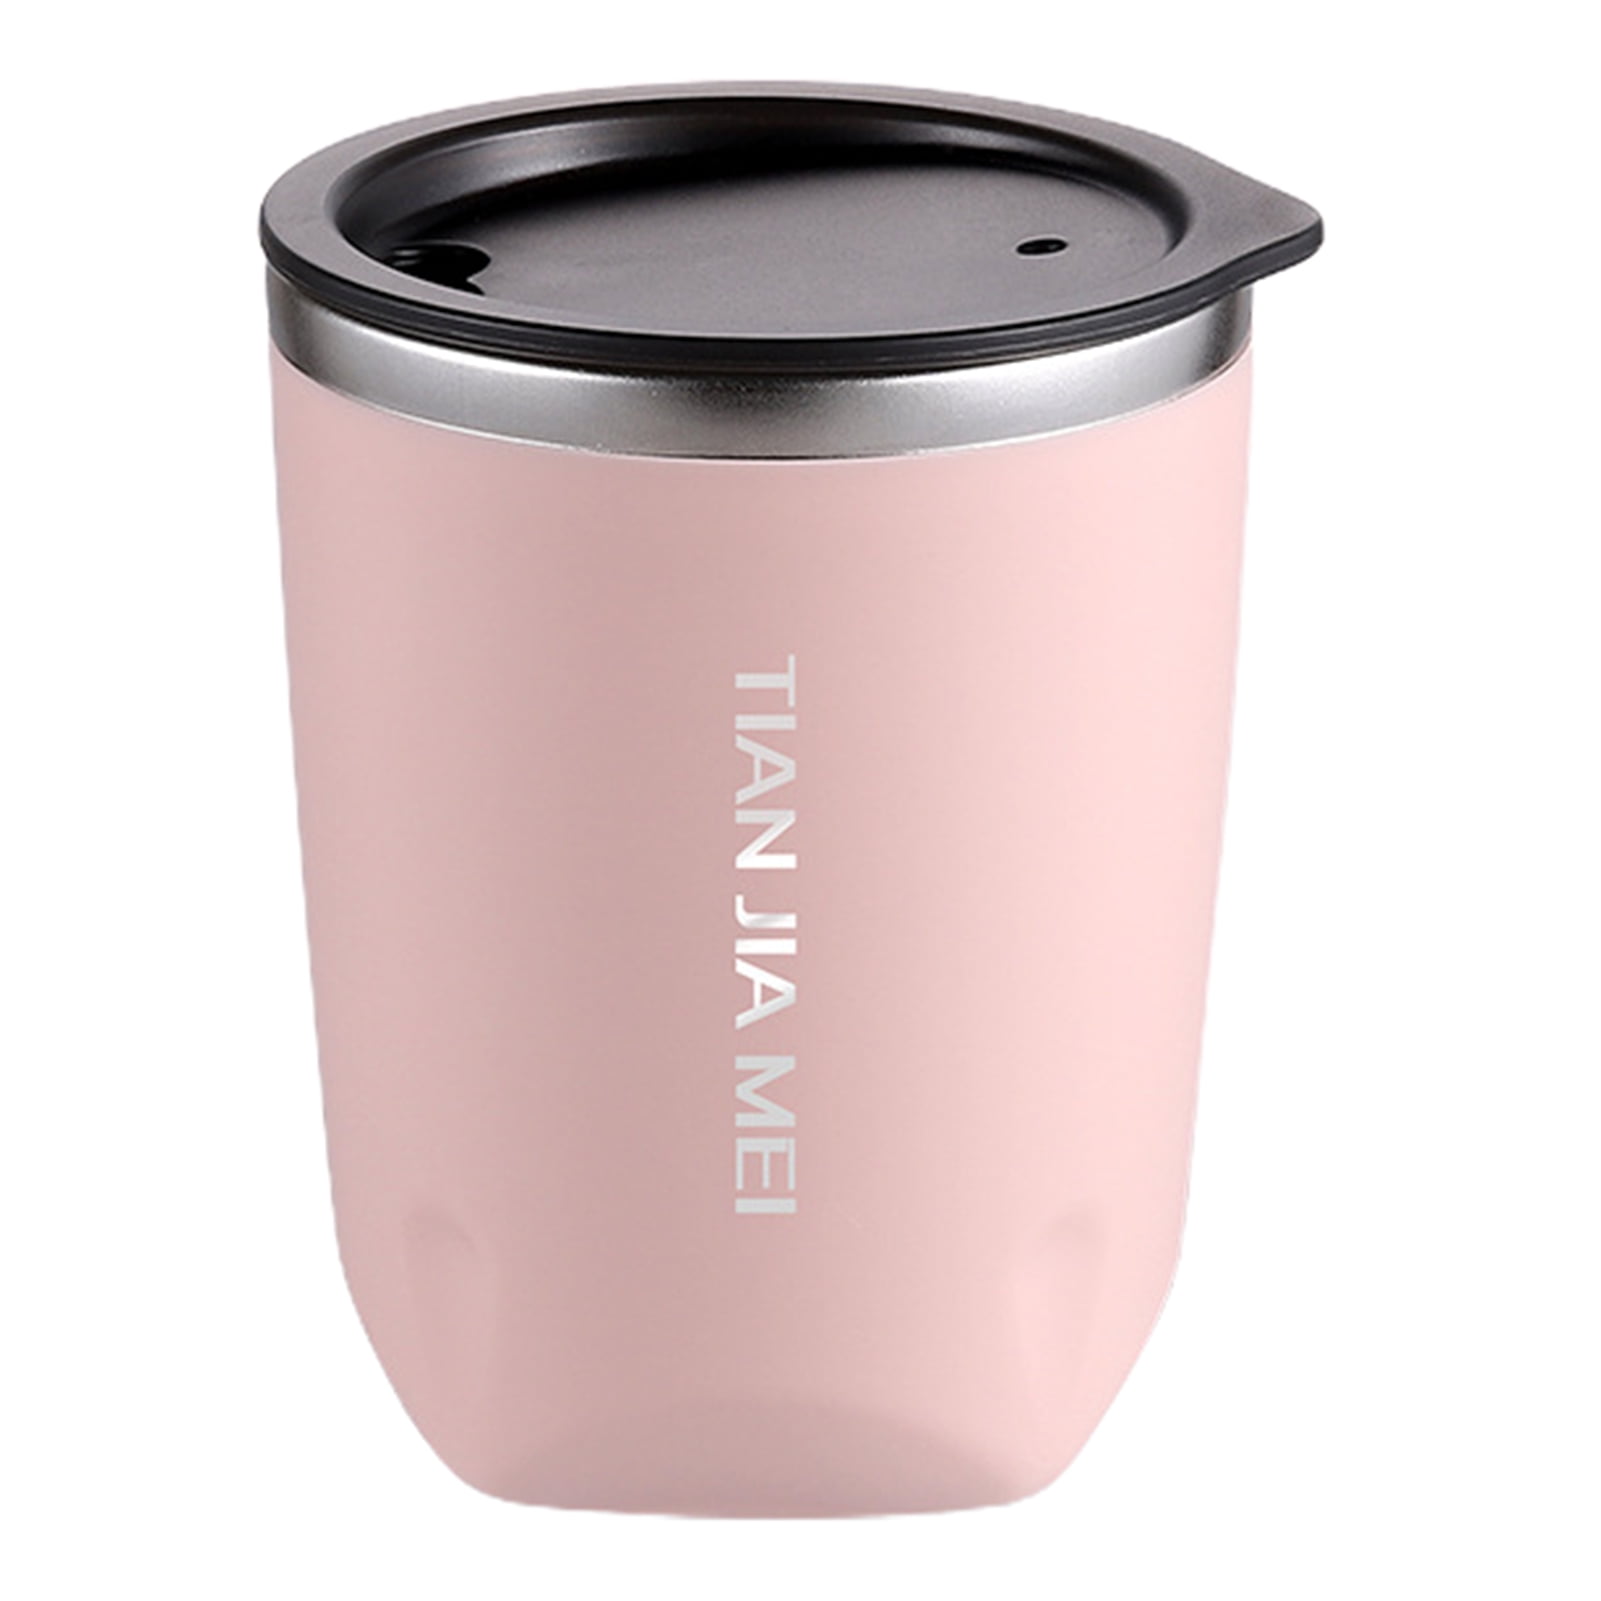 Travelwant 500ml Insulated Coffee Mug with Lid, Stainless Steel, Double  Wall Vacuum Insulated Travel Mug Coffee Cup with Handle, Stainless Steel/Silver  